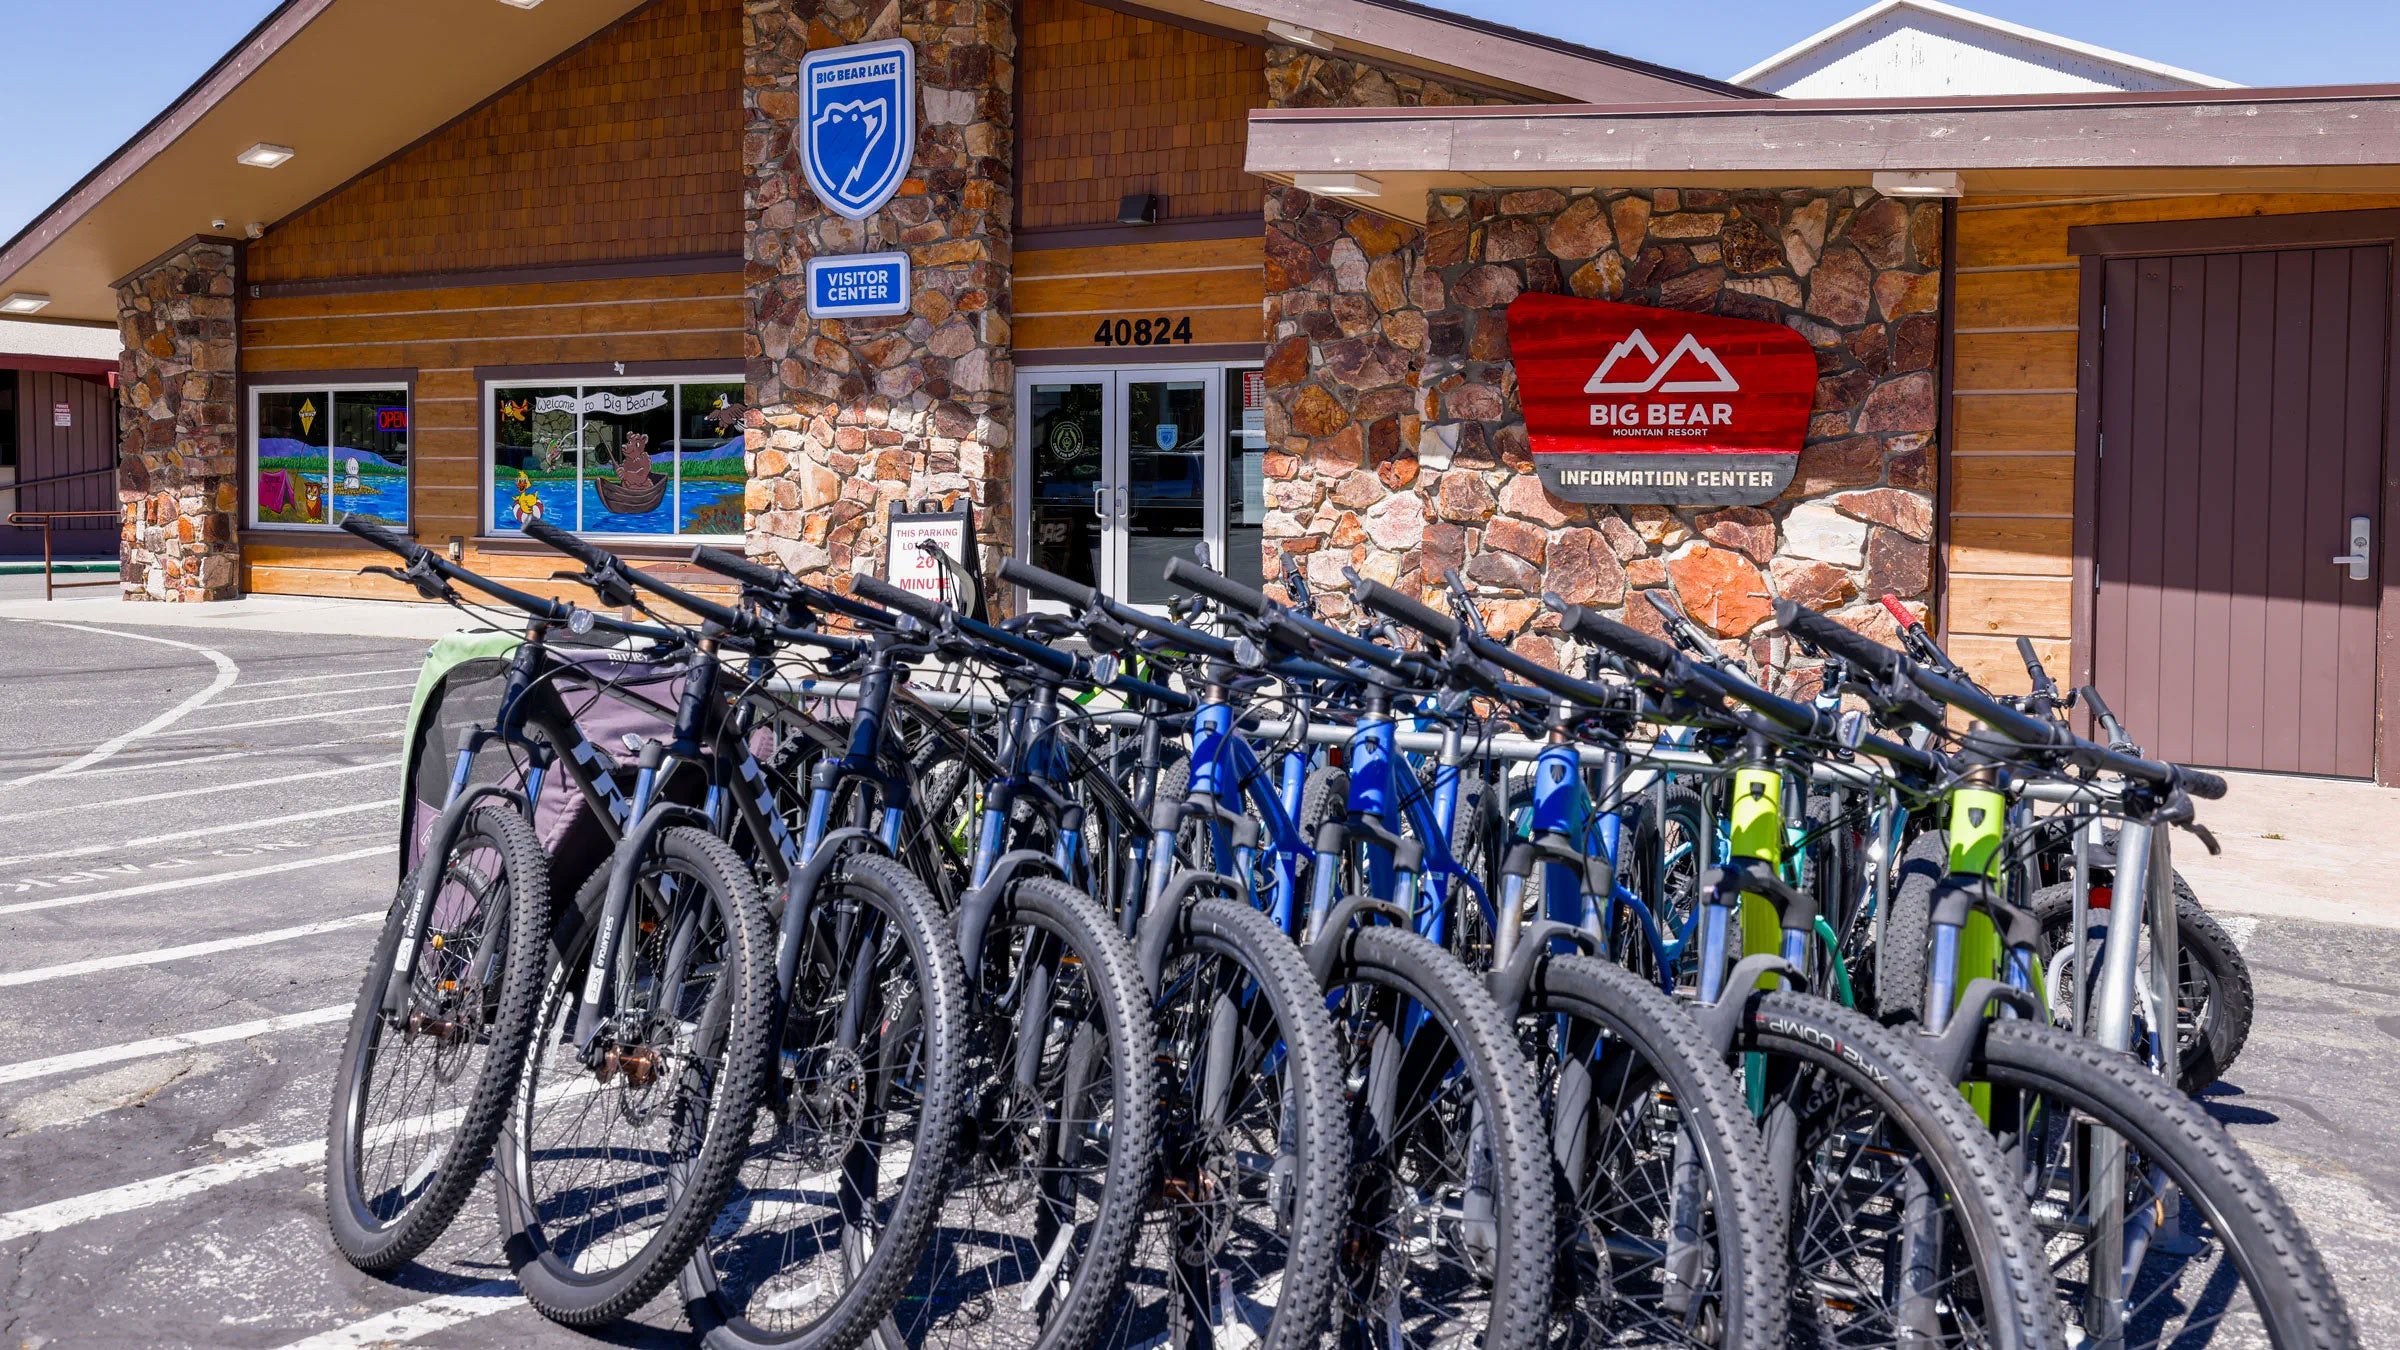 Big Bear Lake's Visitors Center Station during summer with rental bikes in front of storefront